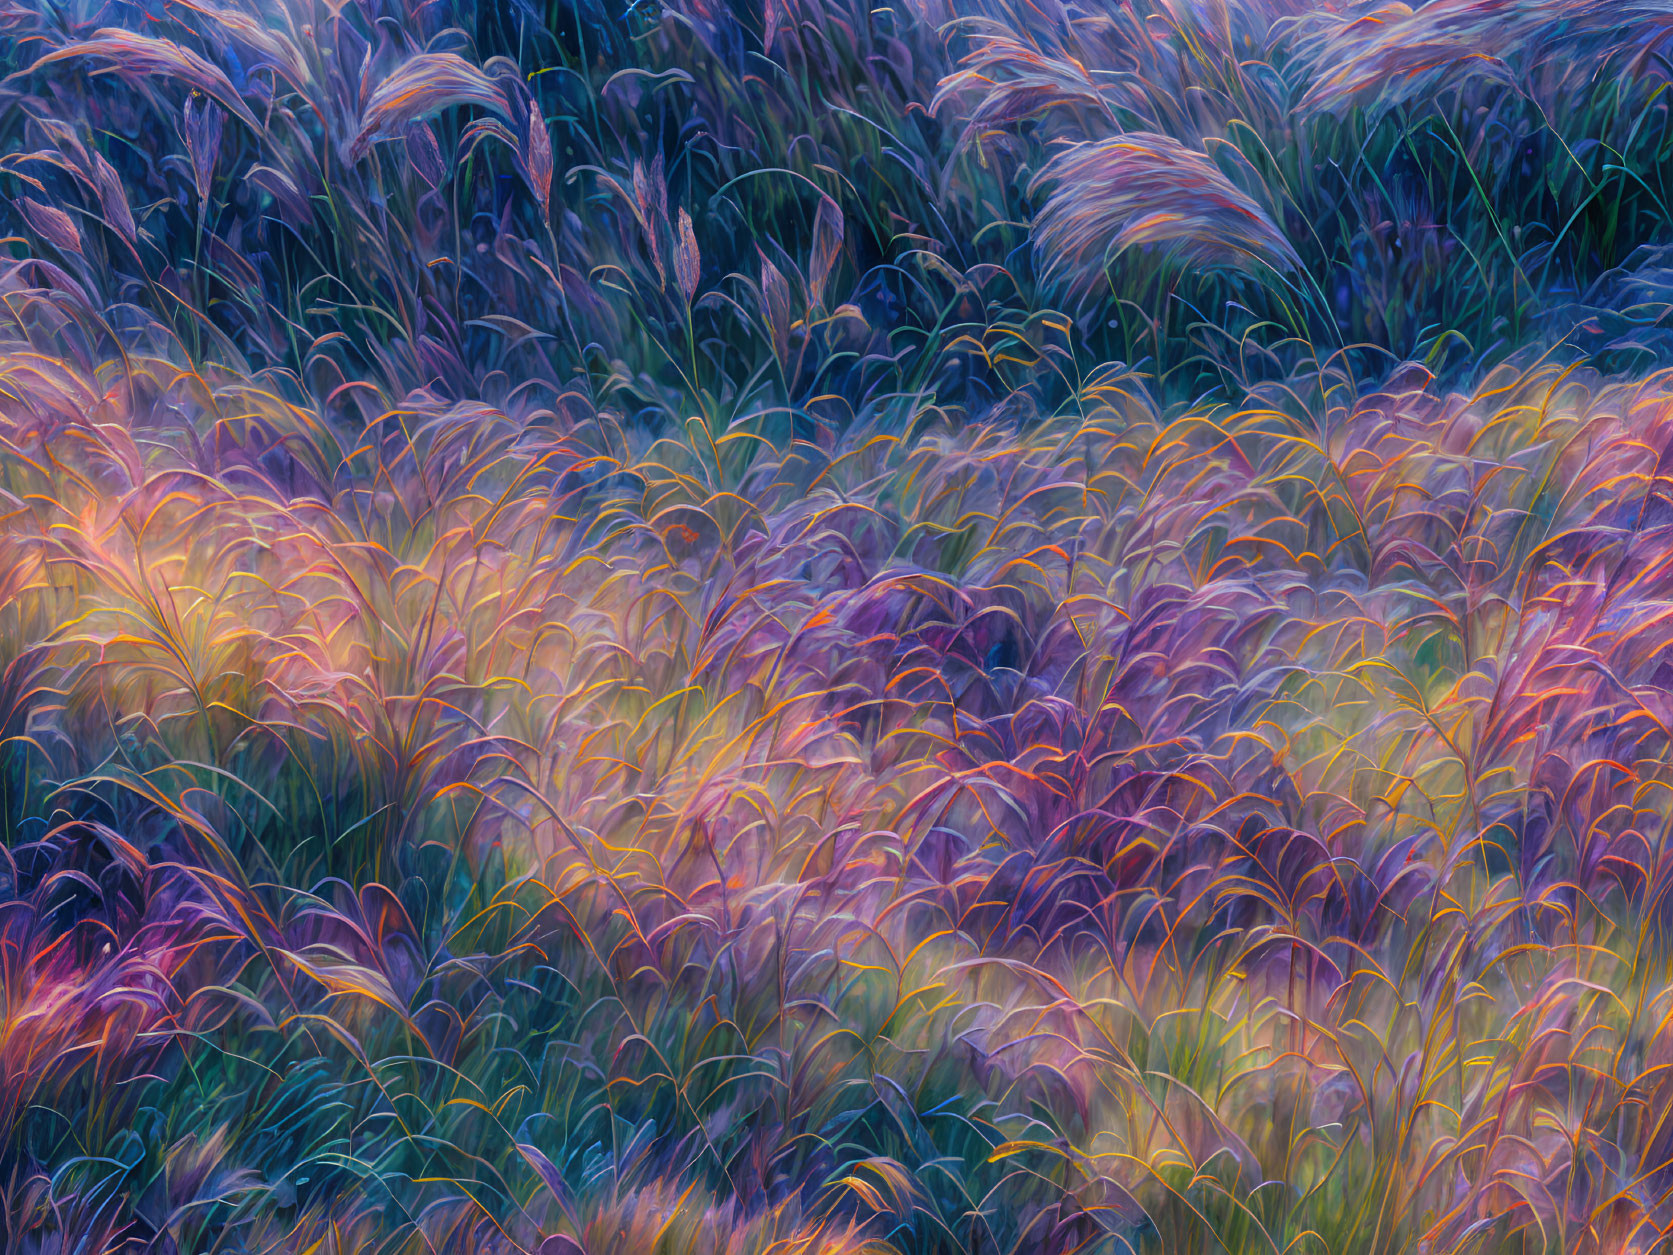 Colorful Impressionistic Field of Tall Grasses with Dreamlike Quality